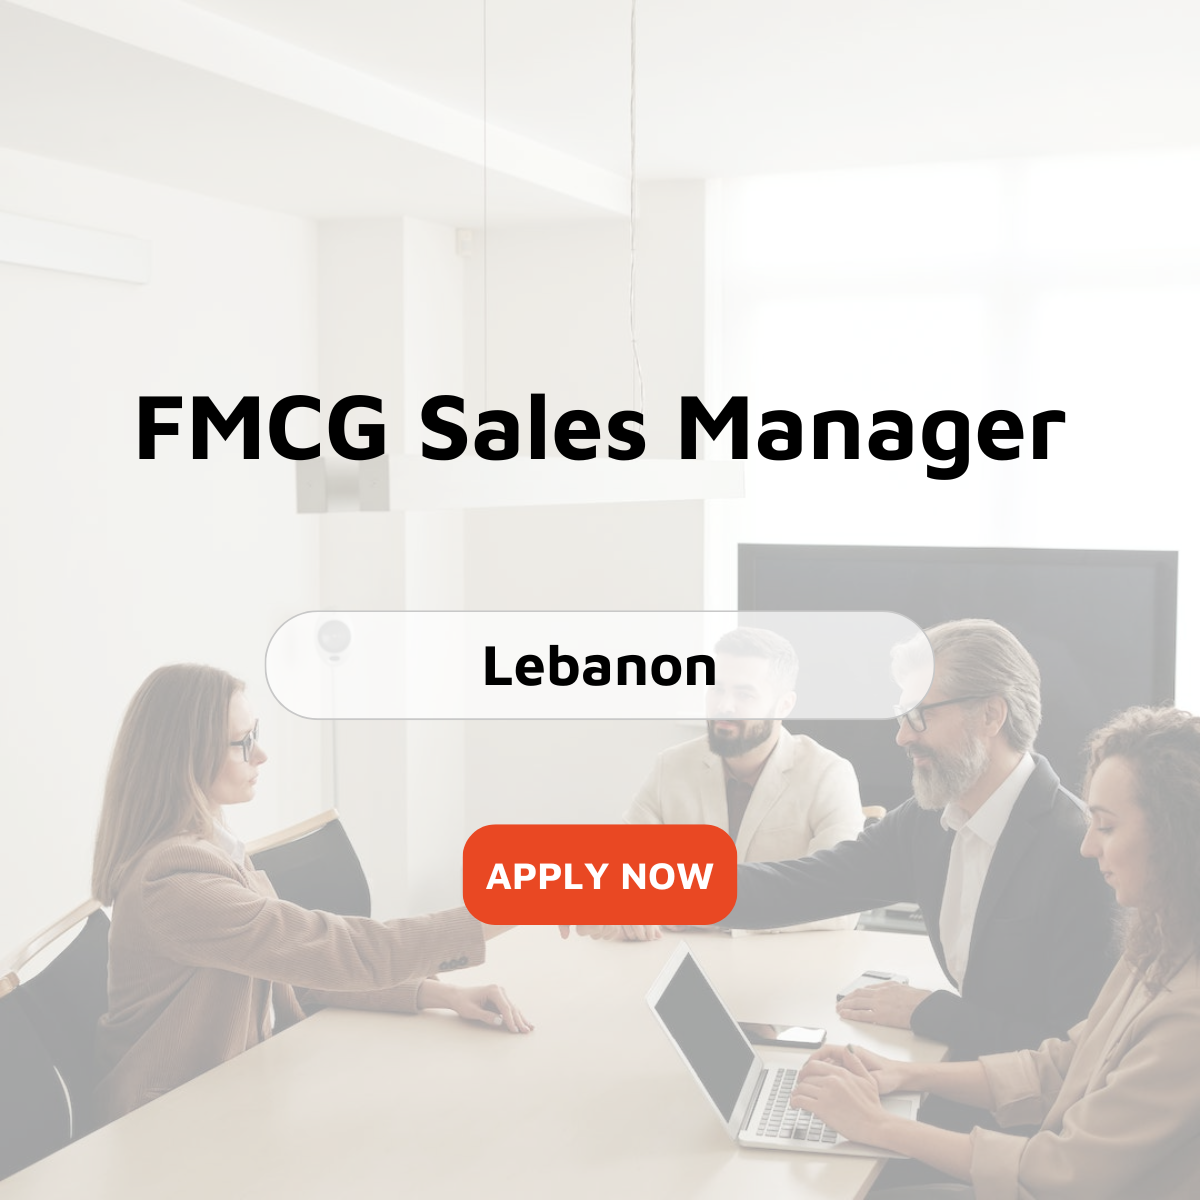 FMCG Sales Manager